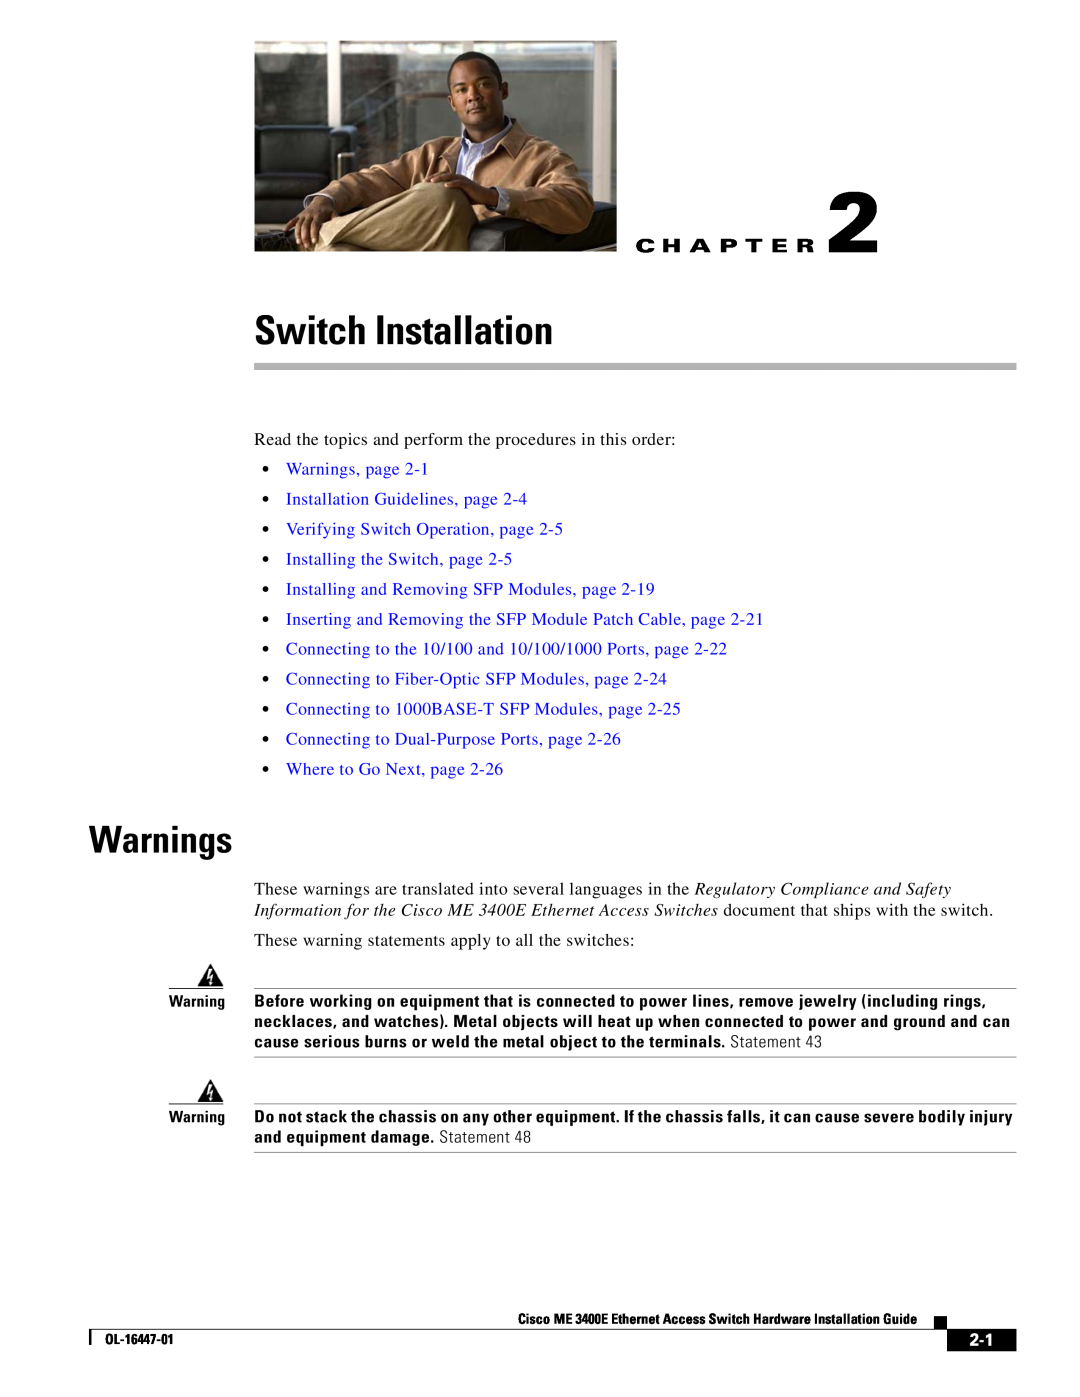 Cisco Systems OL-16447-01 manual Switch Installation, Warnings, page Installation Guidelines, page, C H A P T E R 